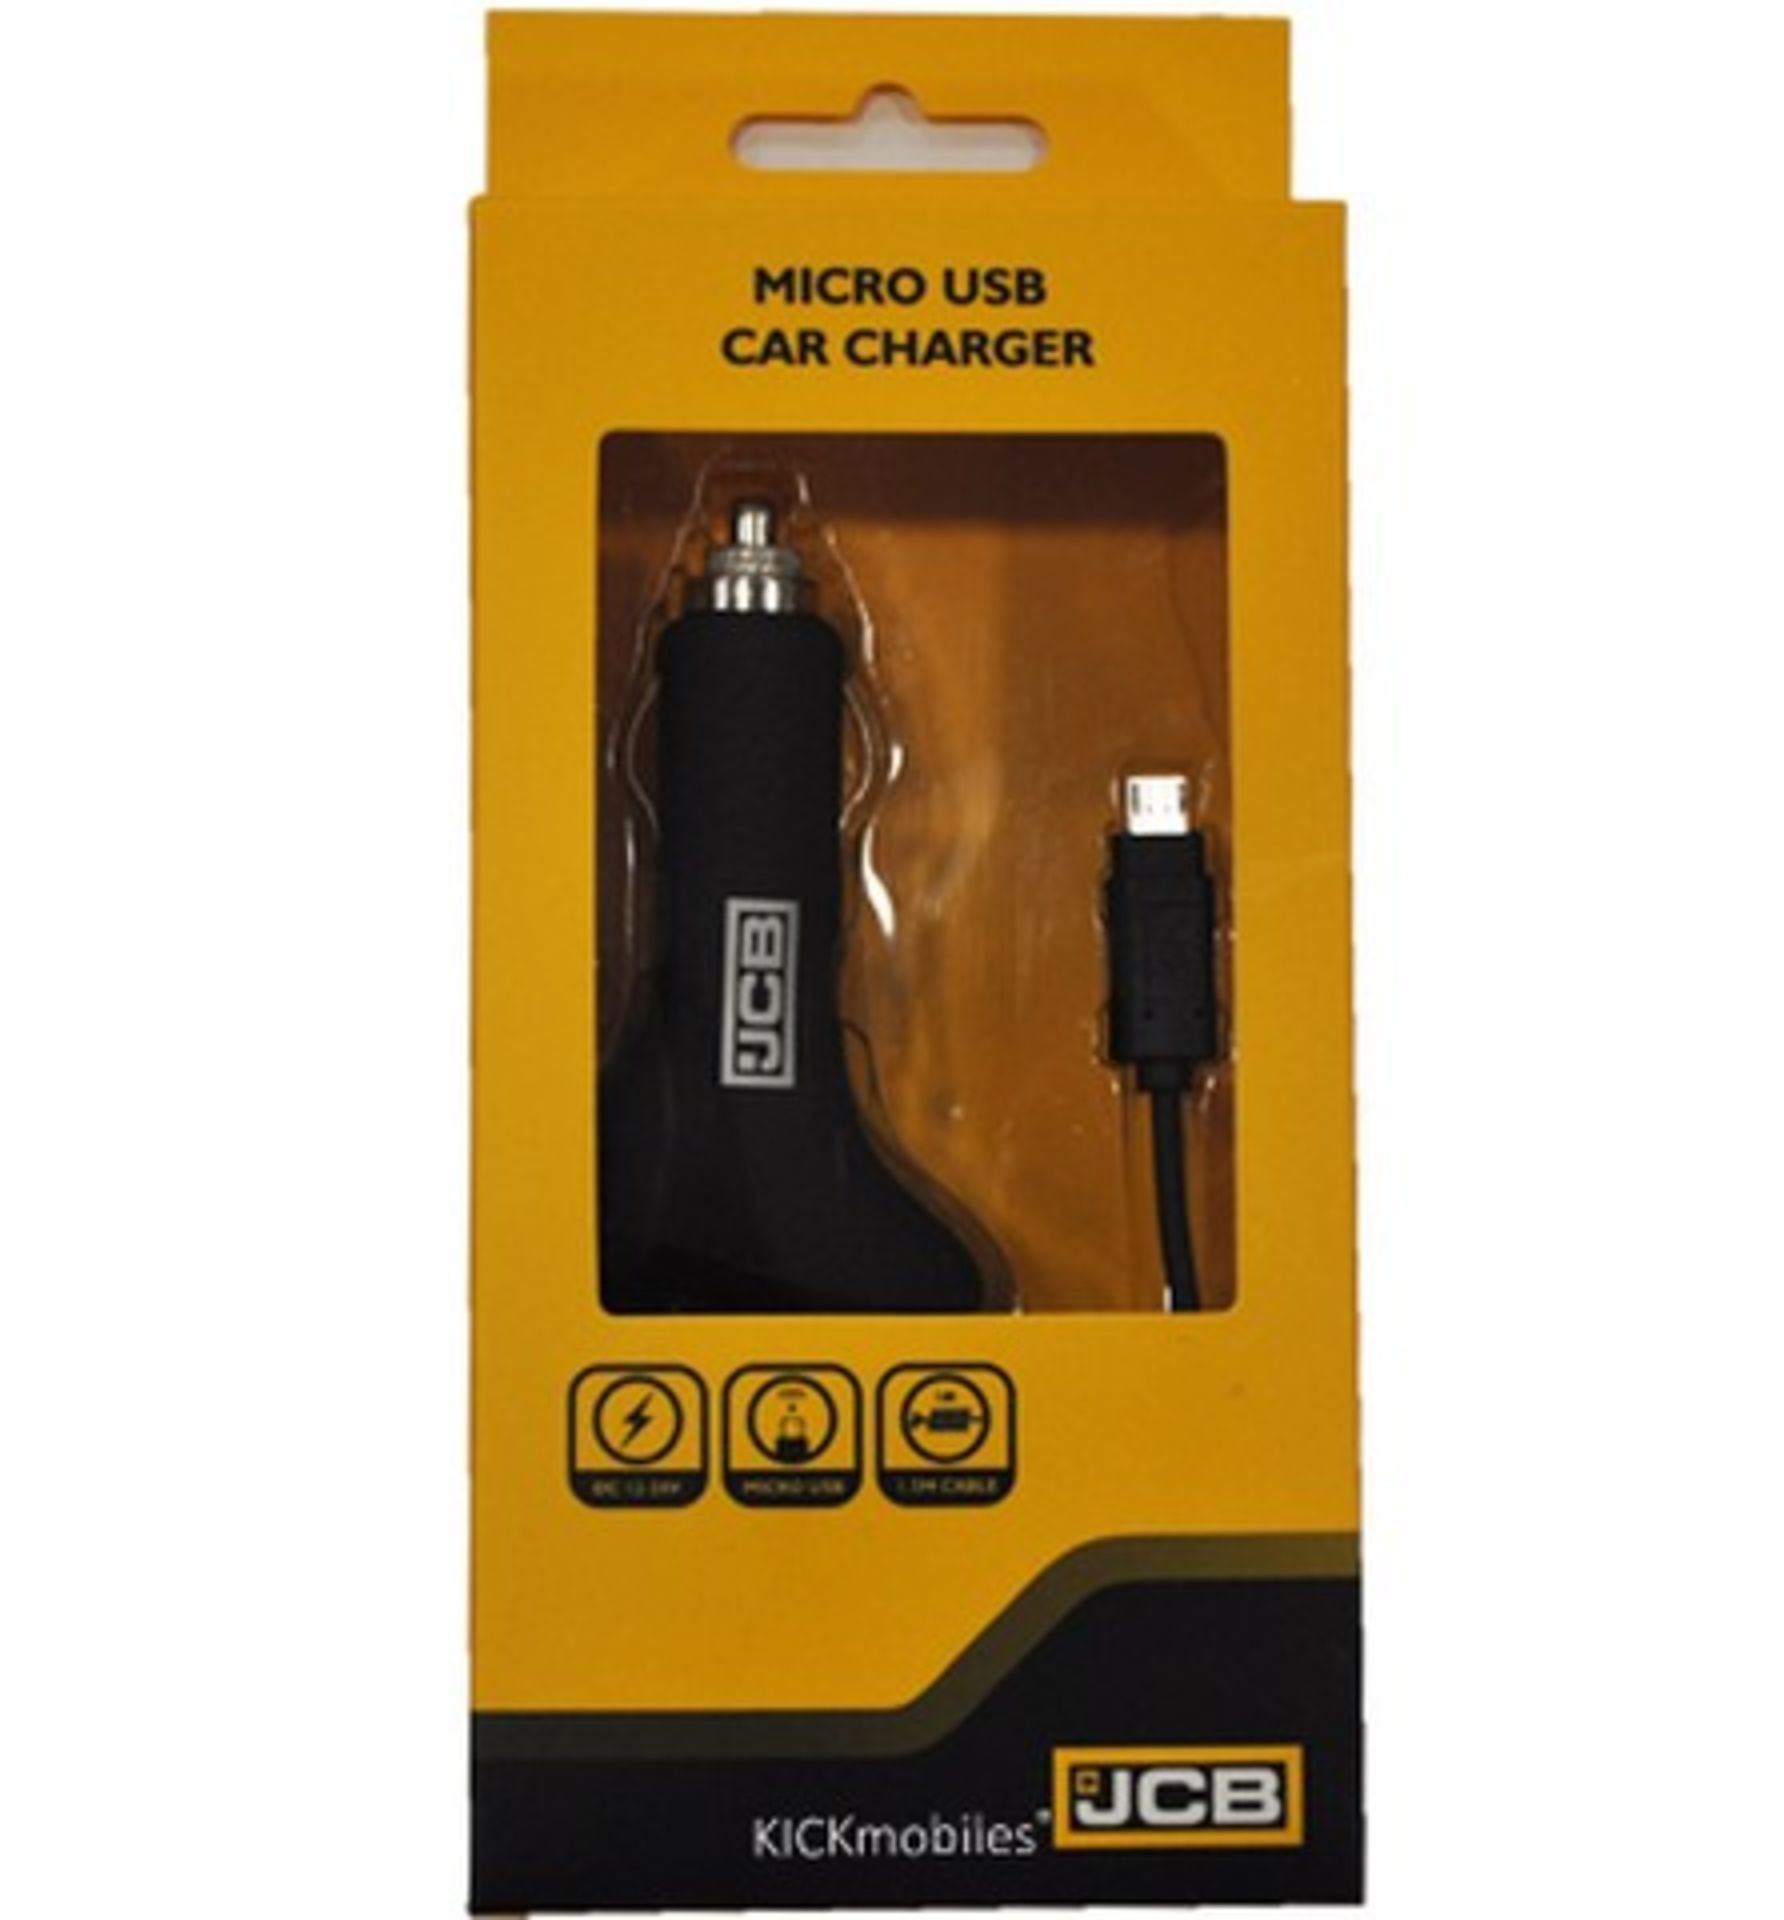 V Brand New JCB 12V Micro USB Car Charger - DC 12-24V - Micro USB Connector - 1.5M Coiled Cable - - Image 4 of 4